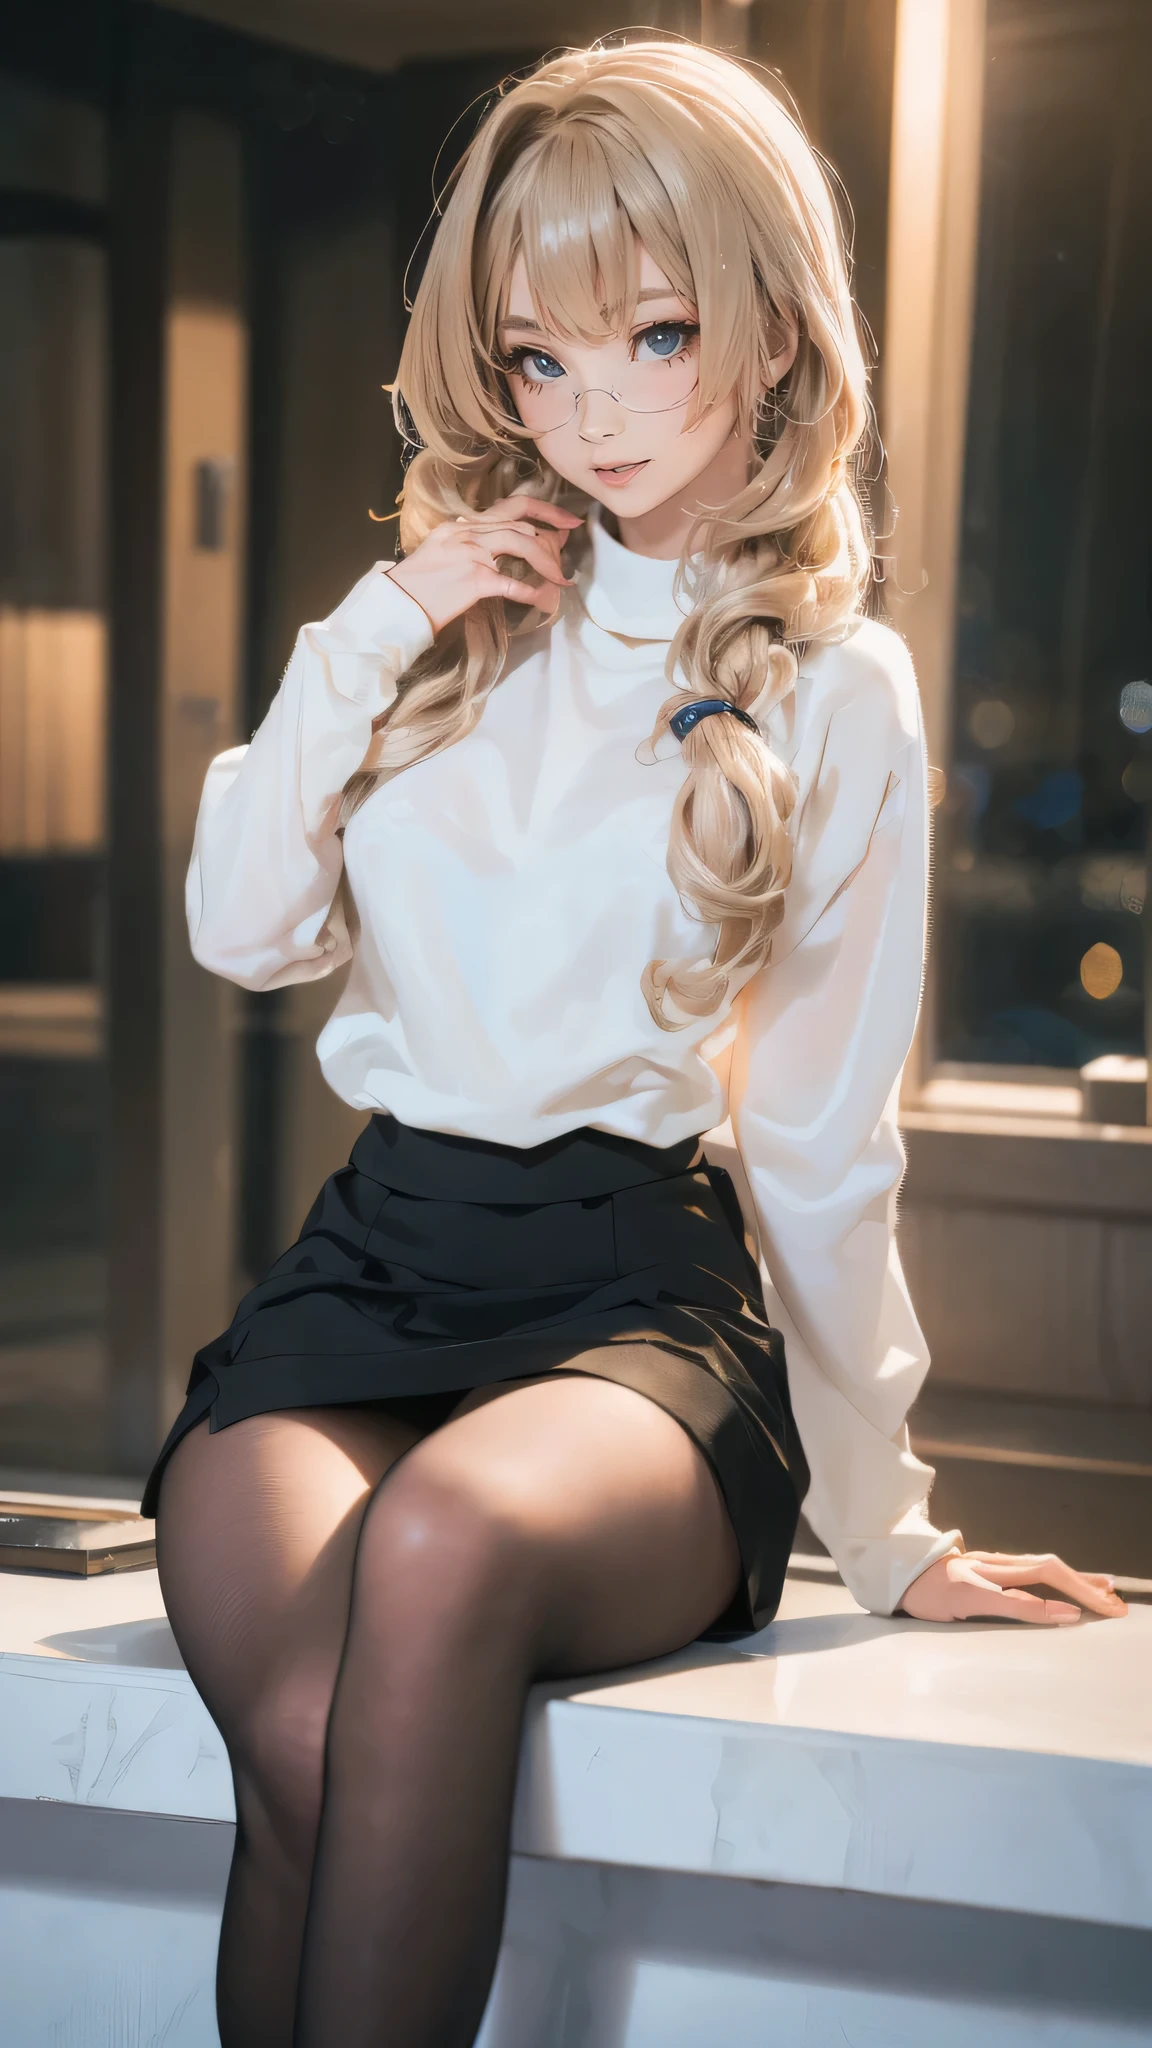 (random porn pose),(random hairstyle),(Highest image quality,(8k),ultra-realistic,best quality, high quality, high definition, high quality texture,high detail,beautiful detailed,fine detailed,extremely detailed cg,detailed texture,a realistic representation of the face,masterpiece,Sense of presence),sweater,tight mini skirt,stockings,Engineer boot